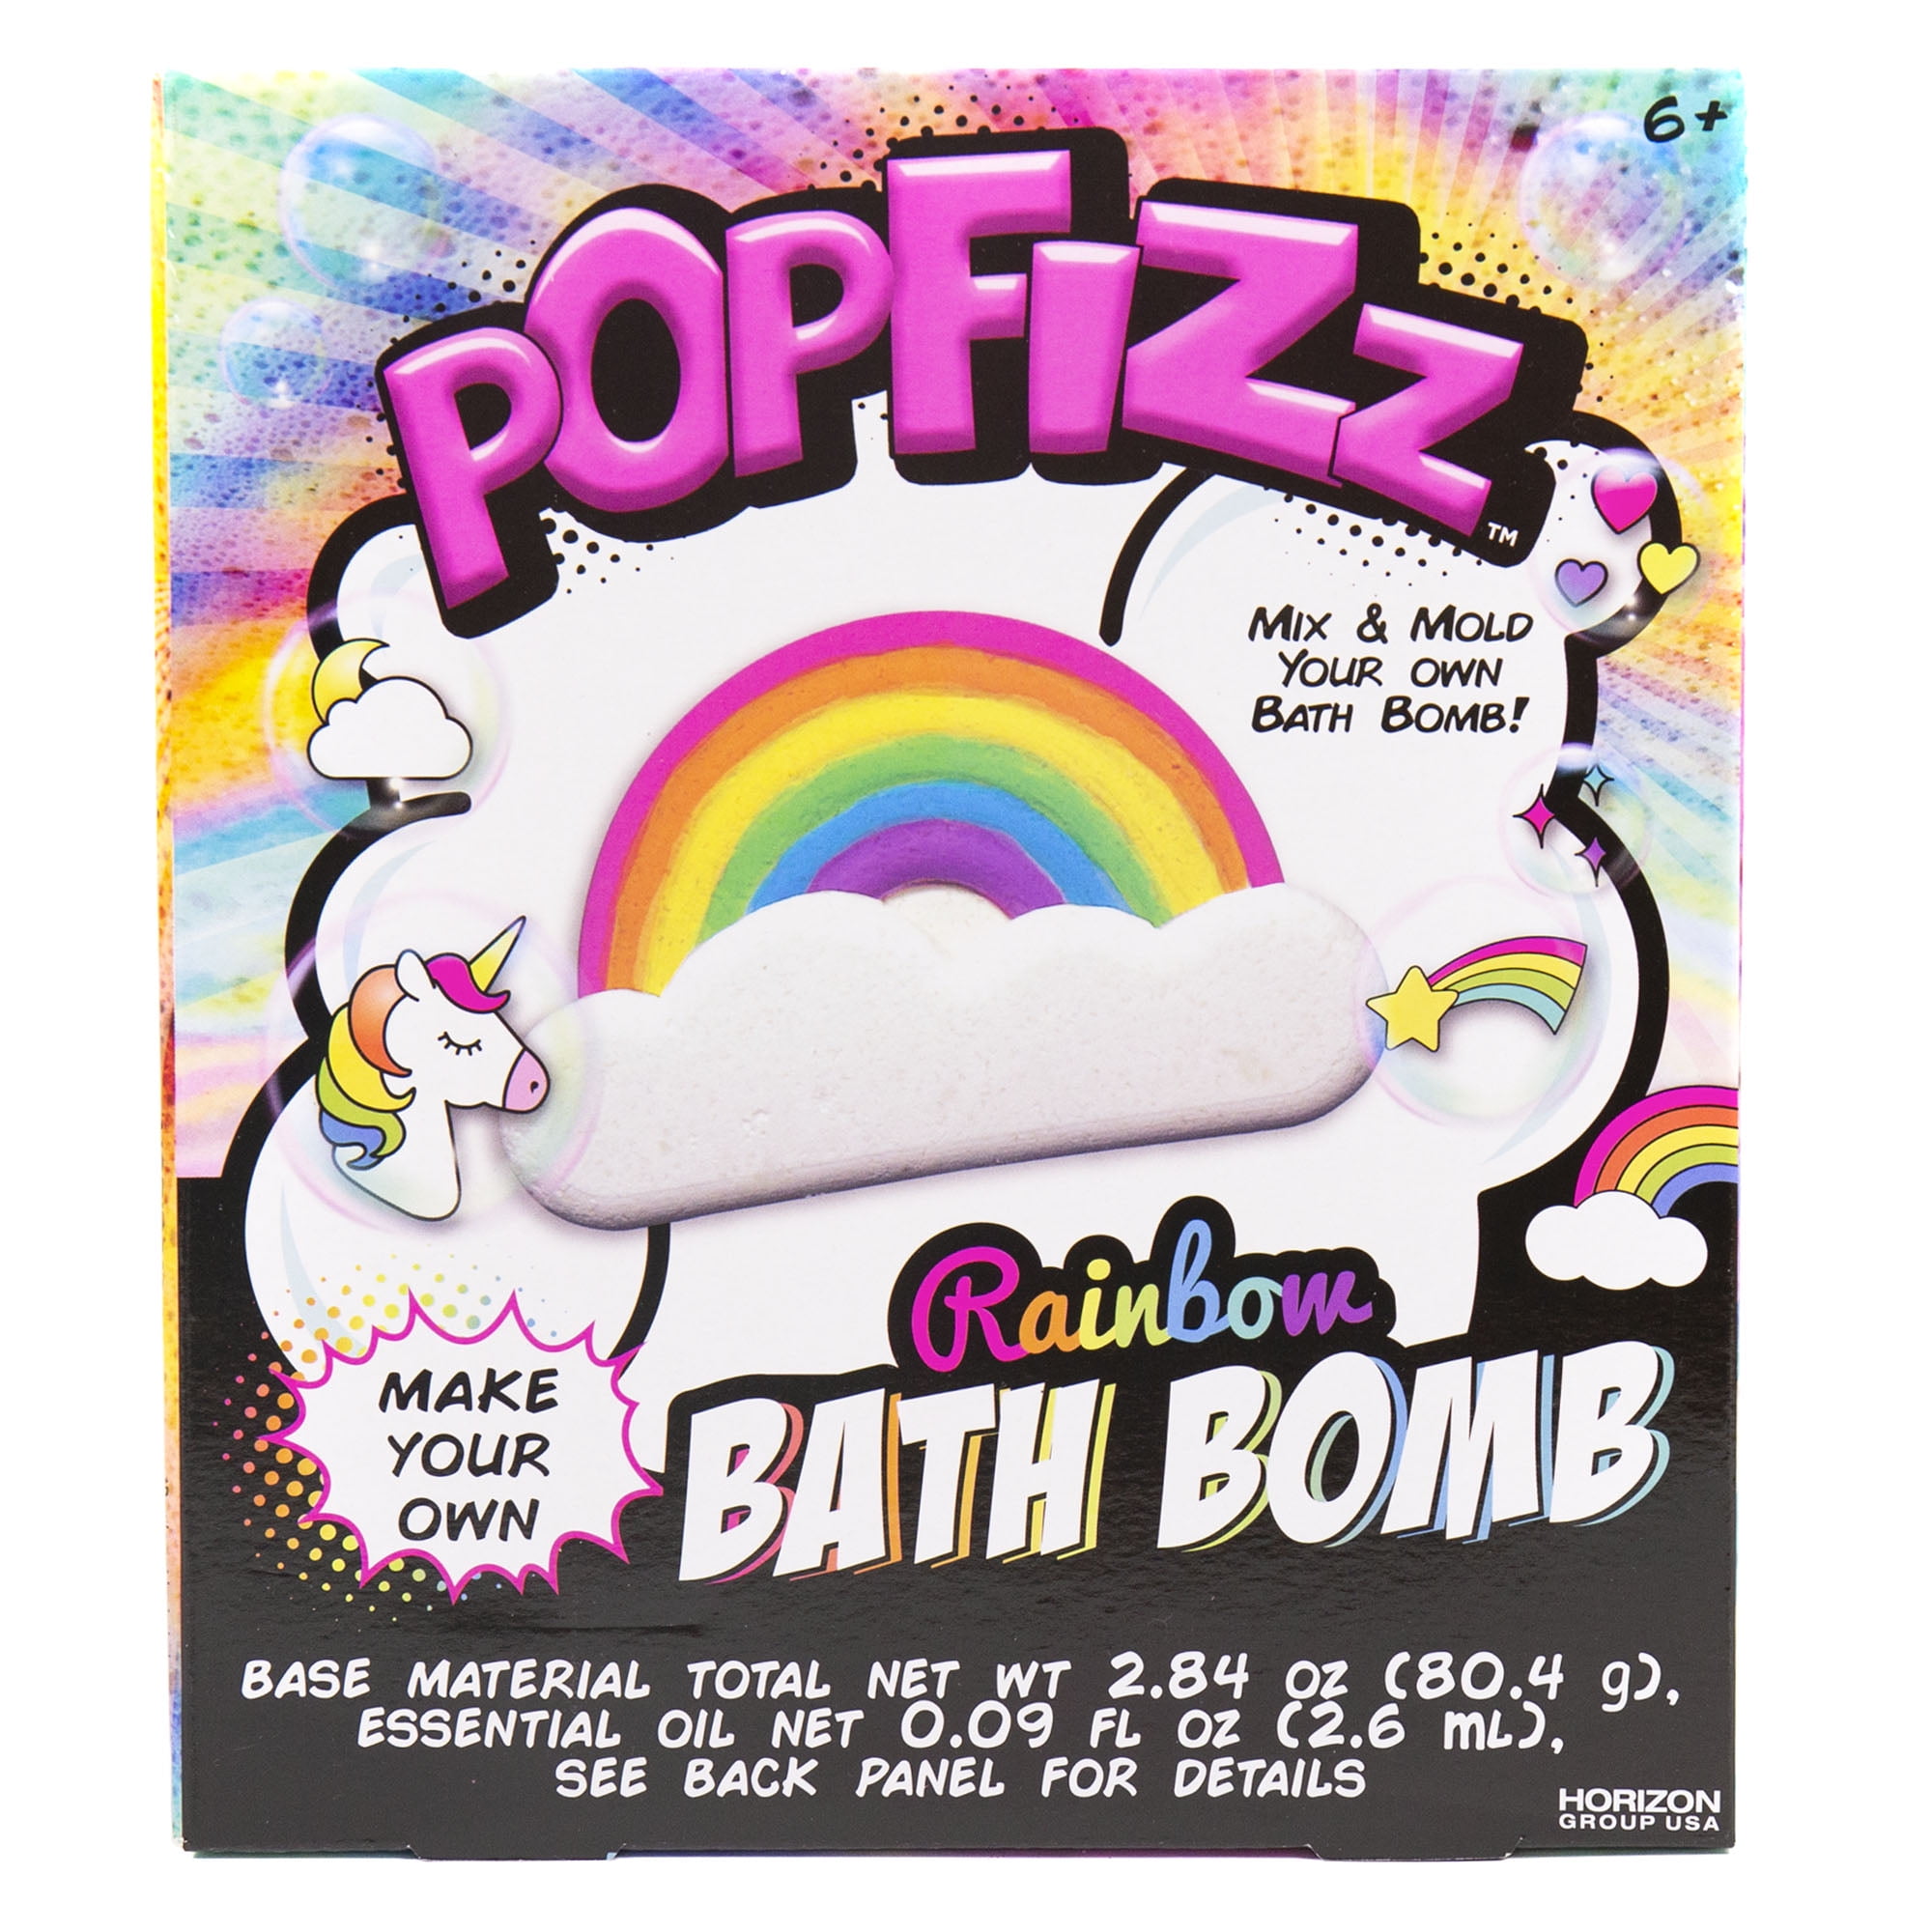 Bomb Party - Drop. Fizz. FUN. It's all part of the Bomb Party™ experience,  and it happens right here on Facebook! Y'all ready for a little sparkle and  surprise, starting at just